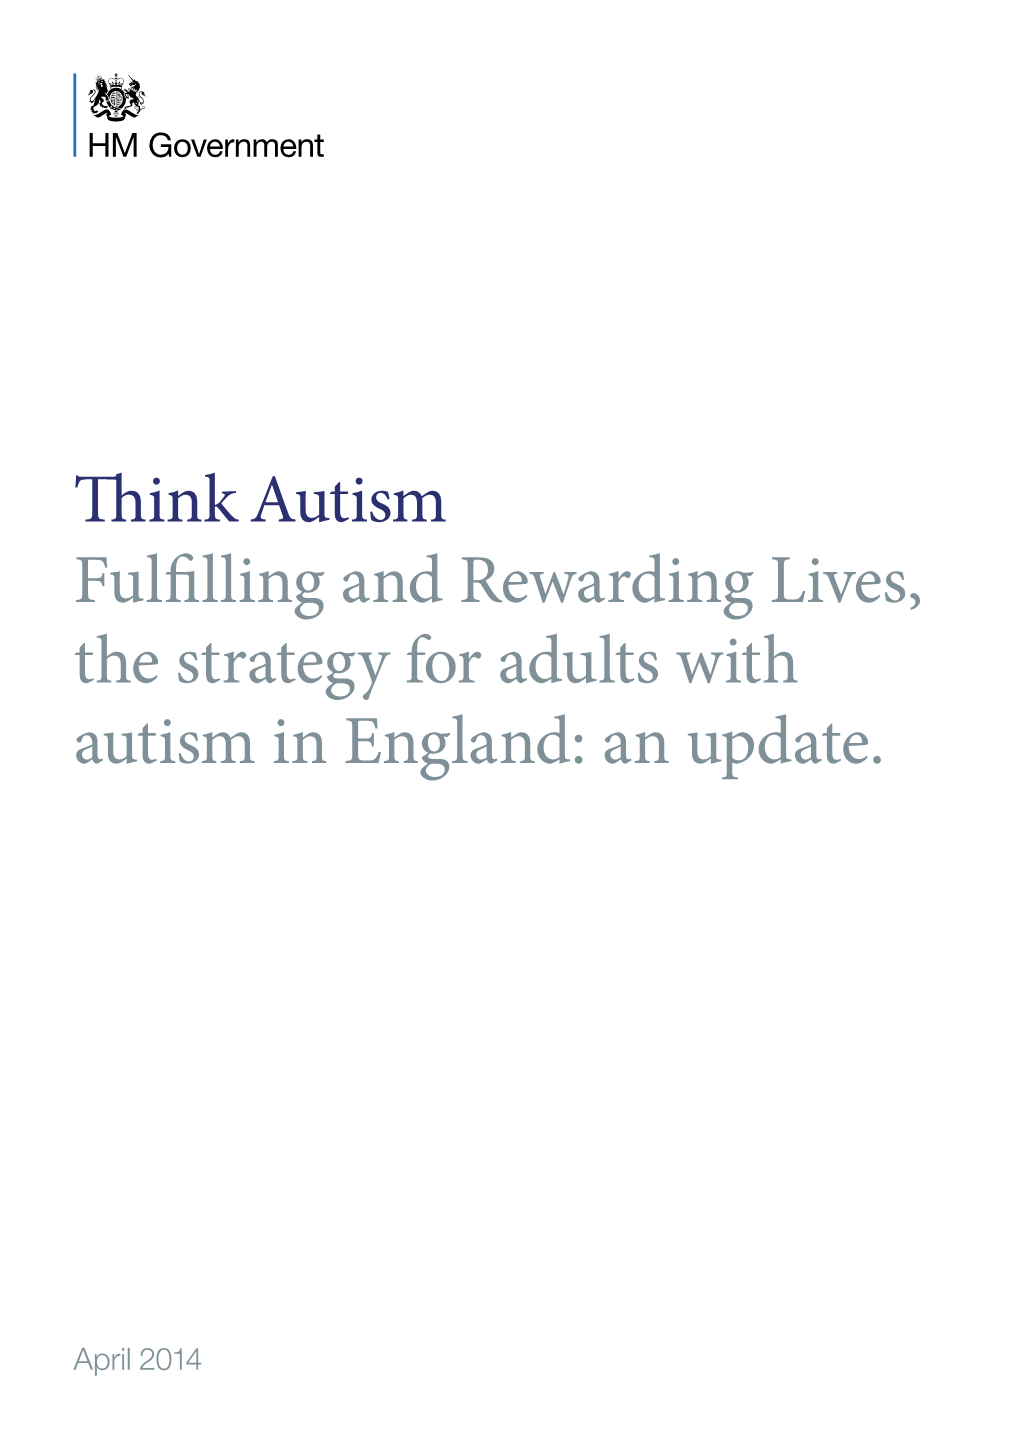 Think Autism Fulfilling and Rewarding Lives, the Strategy for Adults with Autism in England: an Update